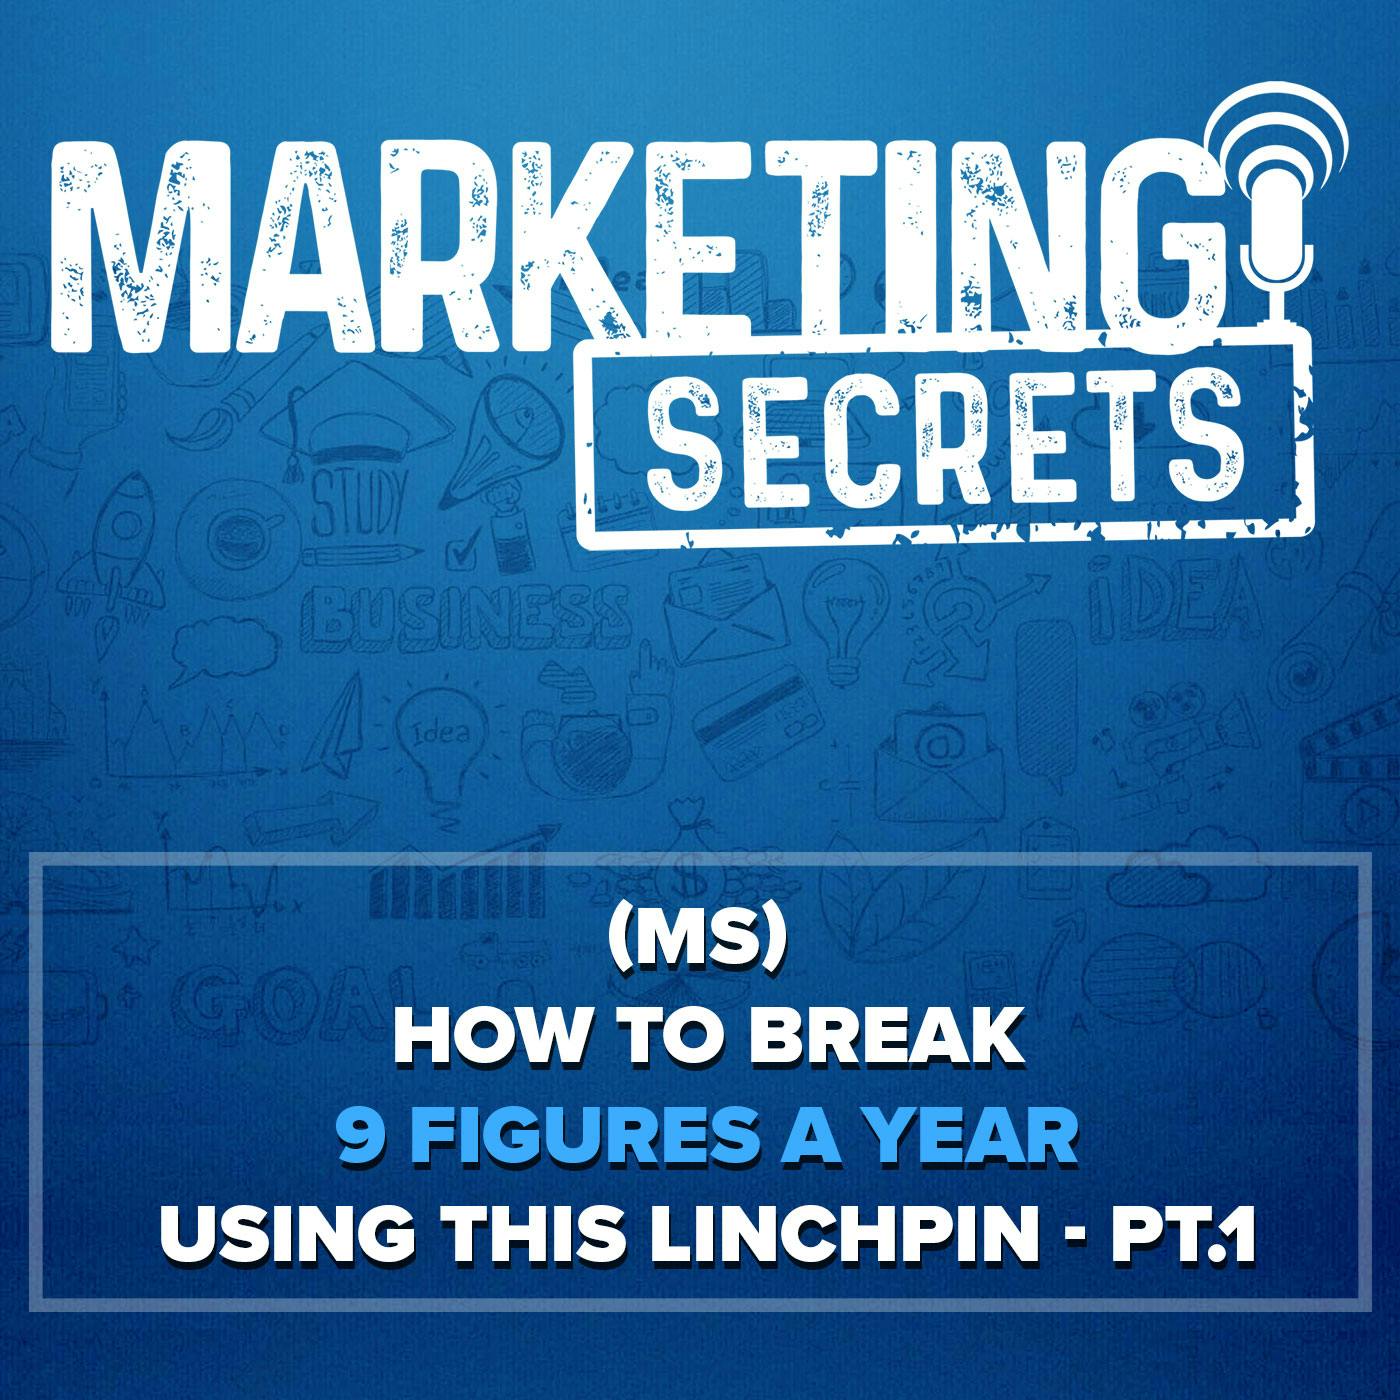 (MS) How To Break 9 Figures a Year Using this Linchpin - Part 1